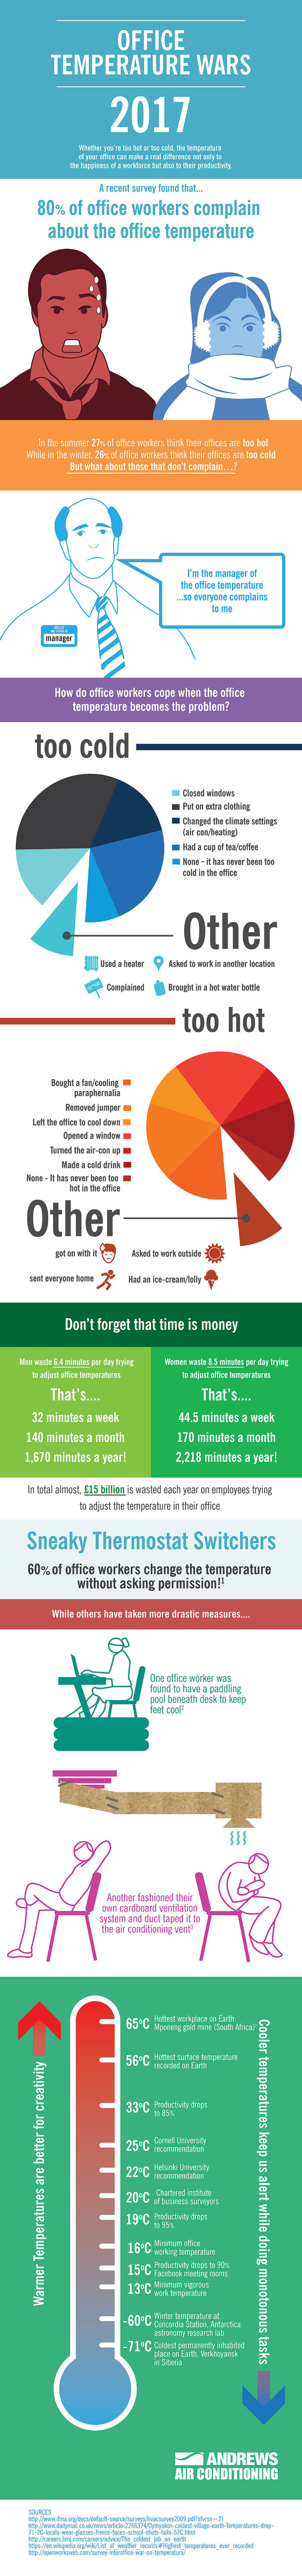 Infographic] Office Temperature Wars Costing Offices Time and Money